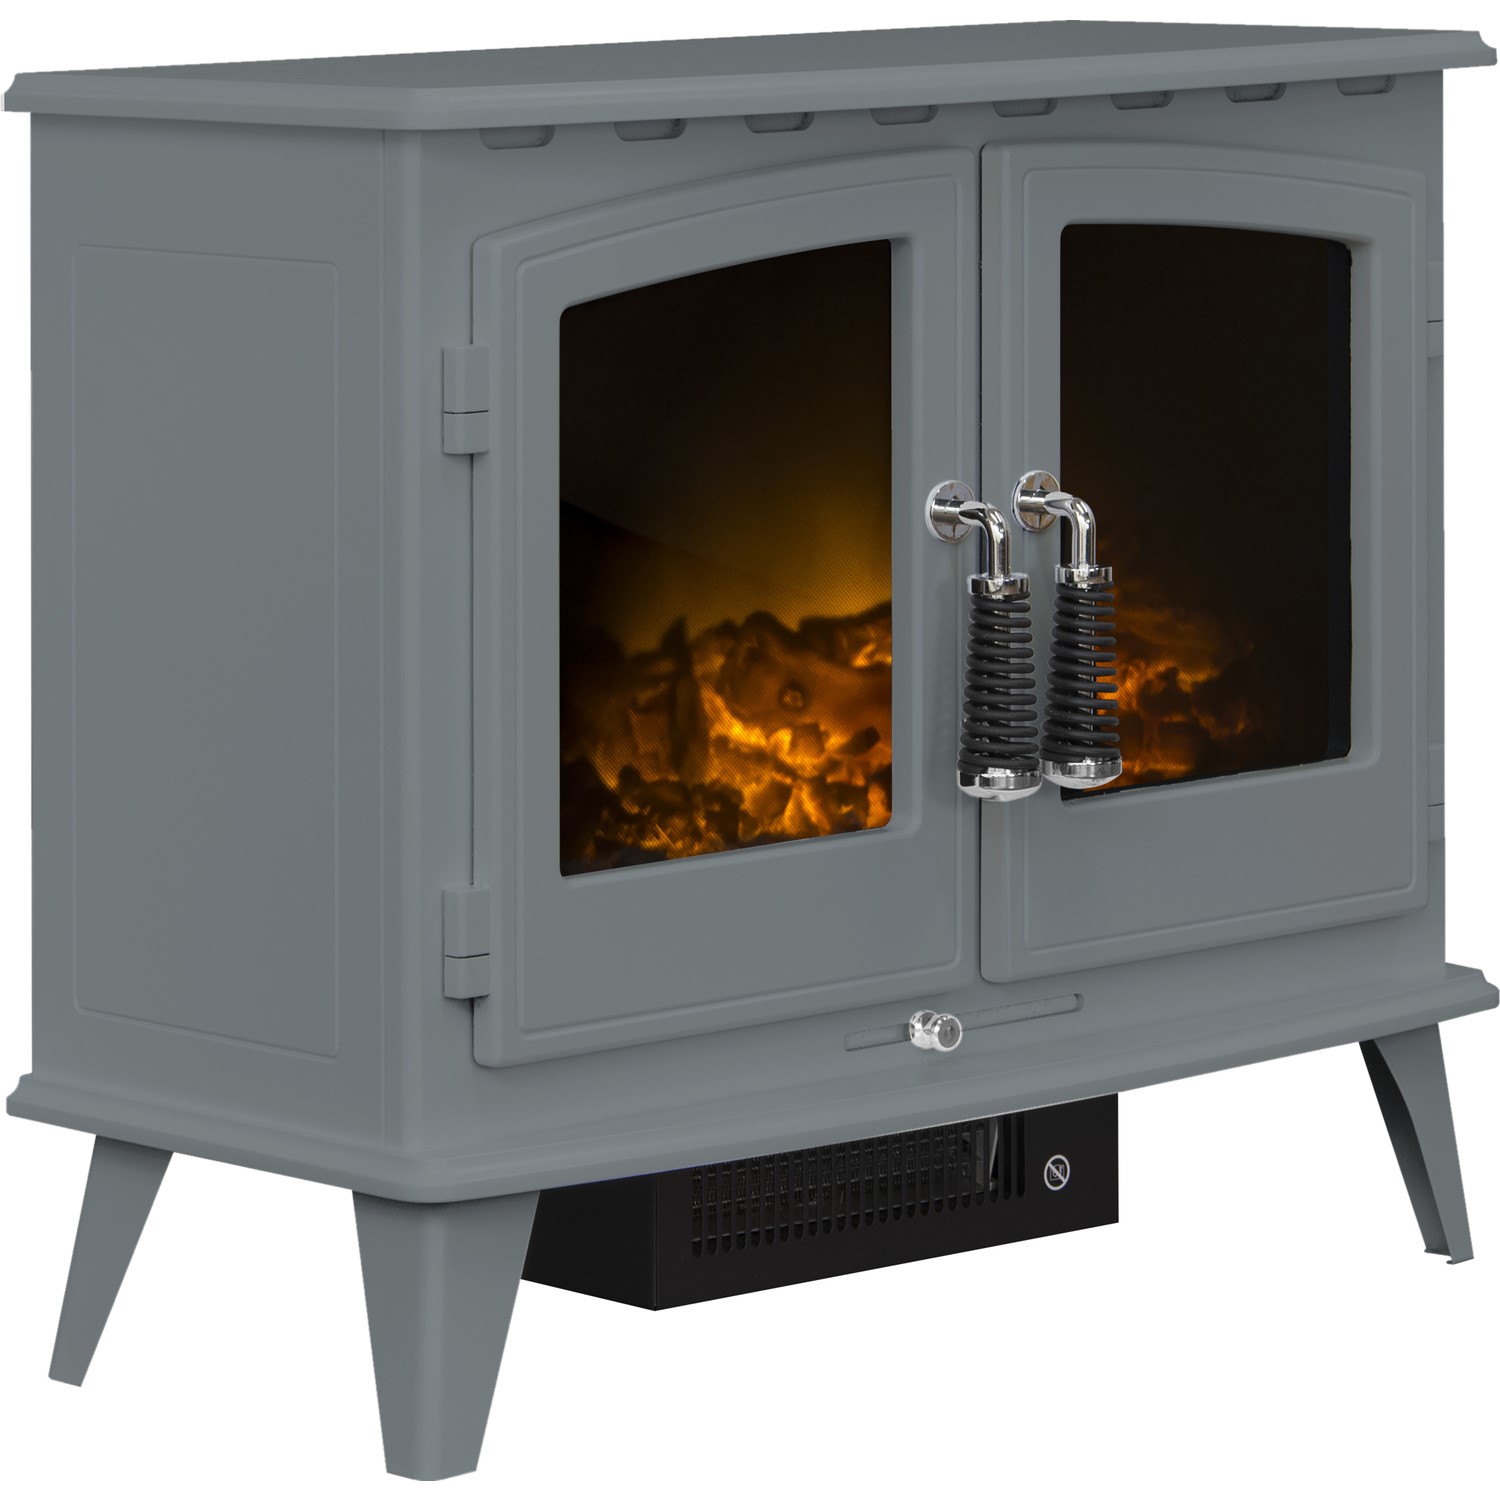 Read more about Adam grey freestanding electric stove fire woodhouse